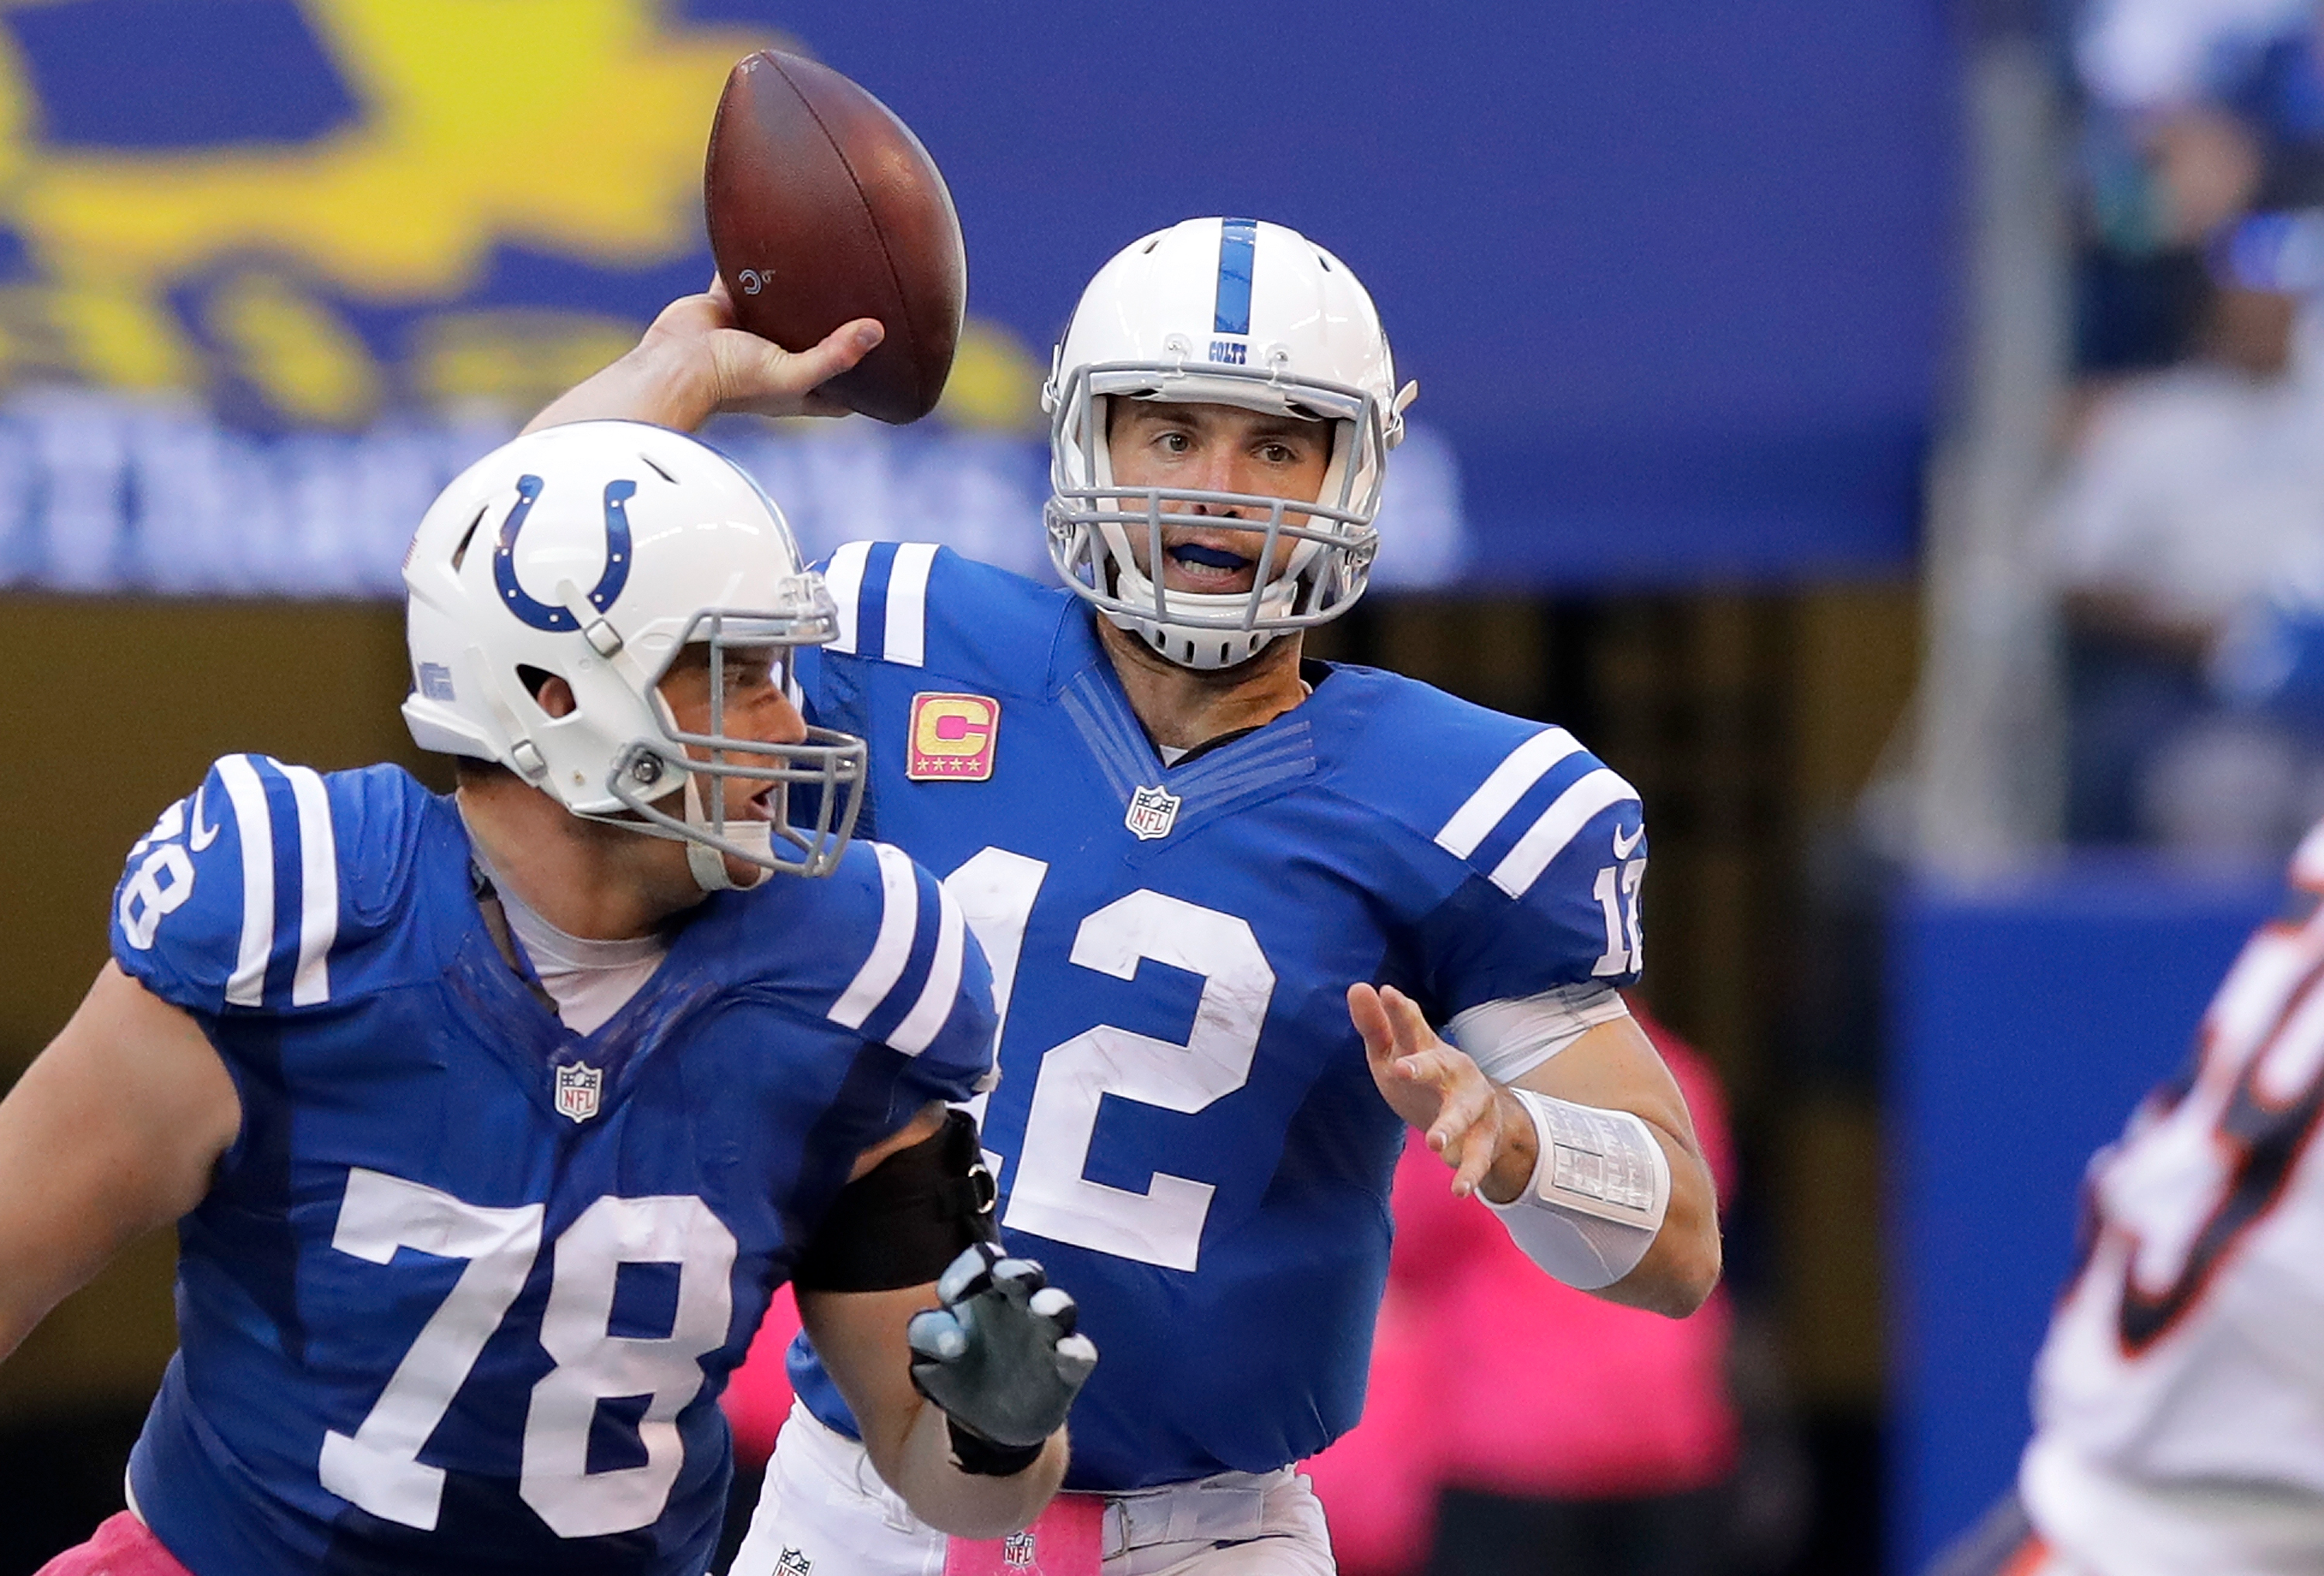 Chiefs vs. Colts Live Stream: How to Watch Game Online